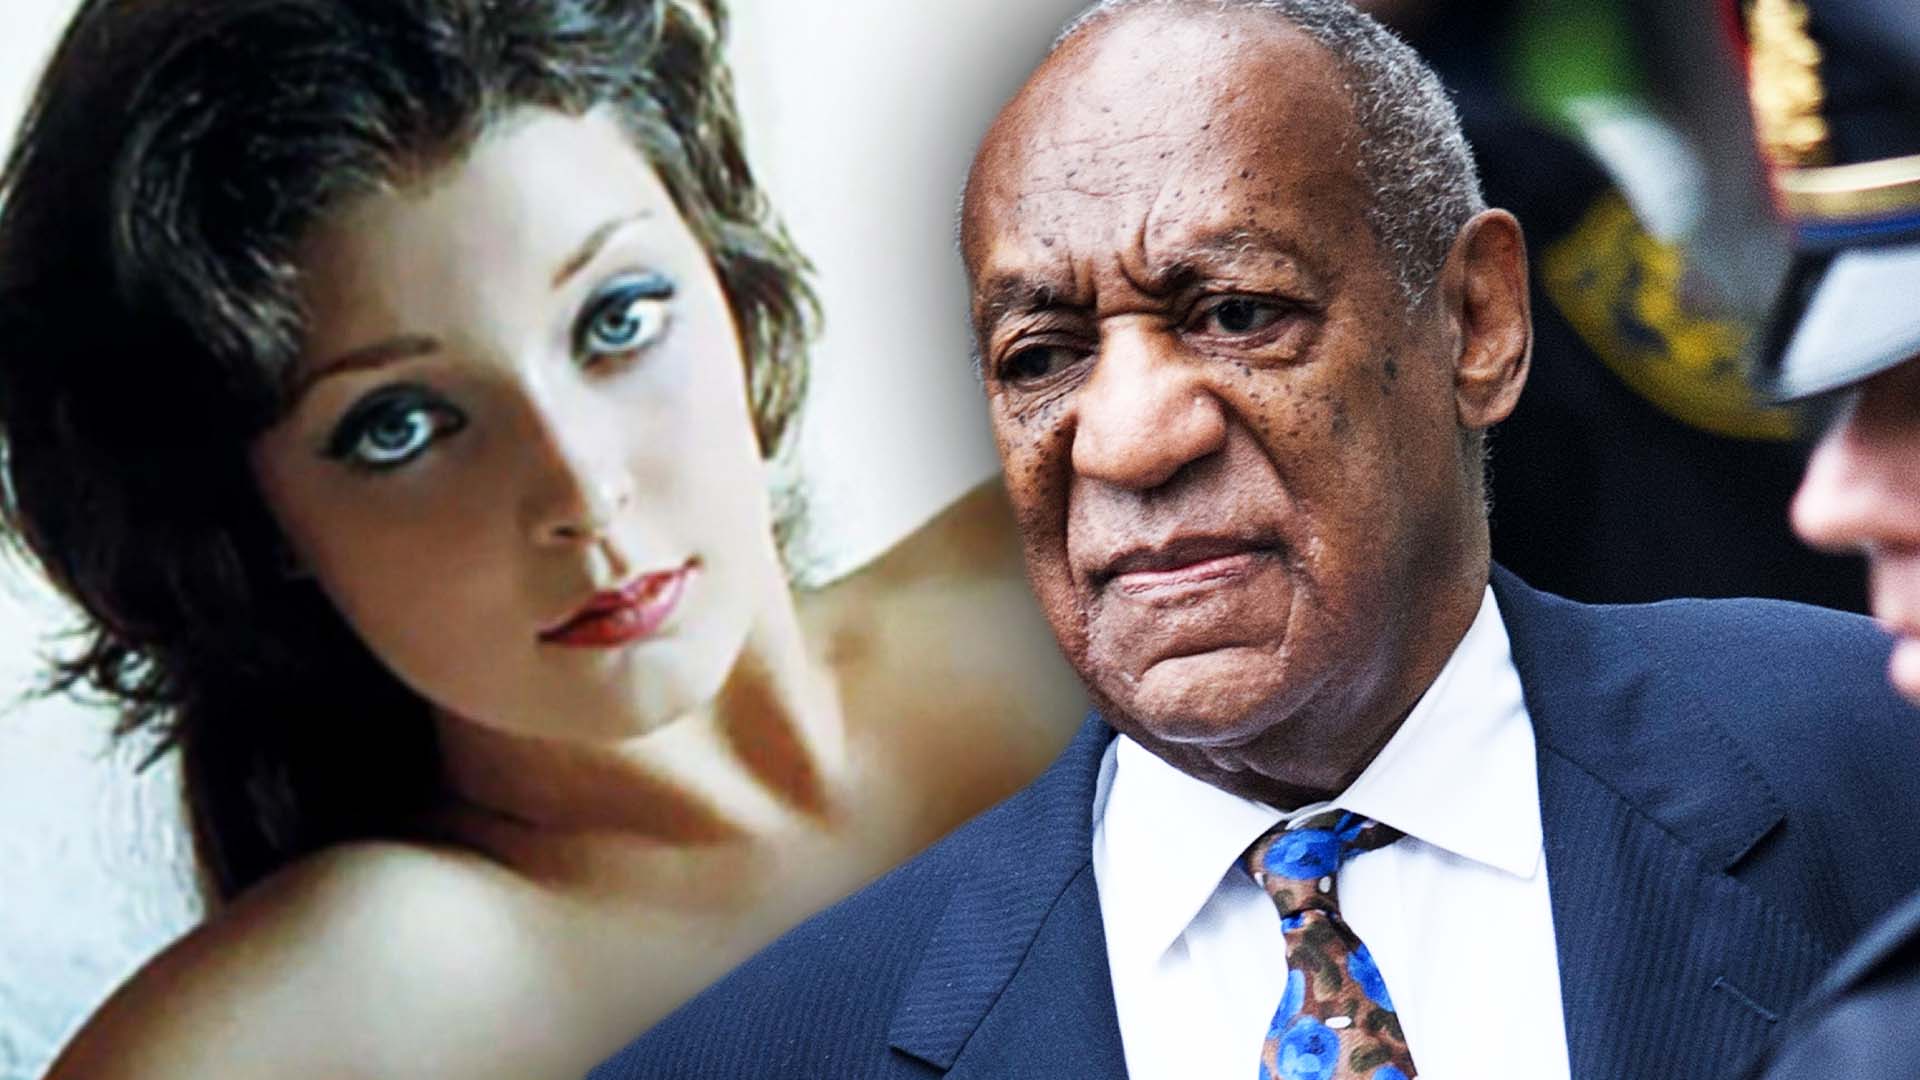 Bill Cosby Daughter - Playboy' Model Sues Bill Cosby for Alleged Sexual Assault | Inside Edition